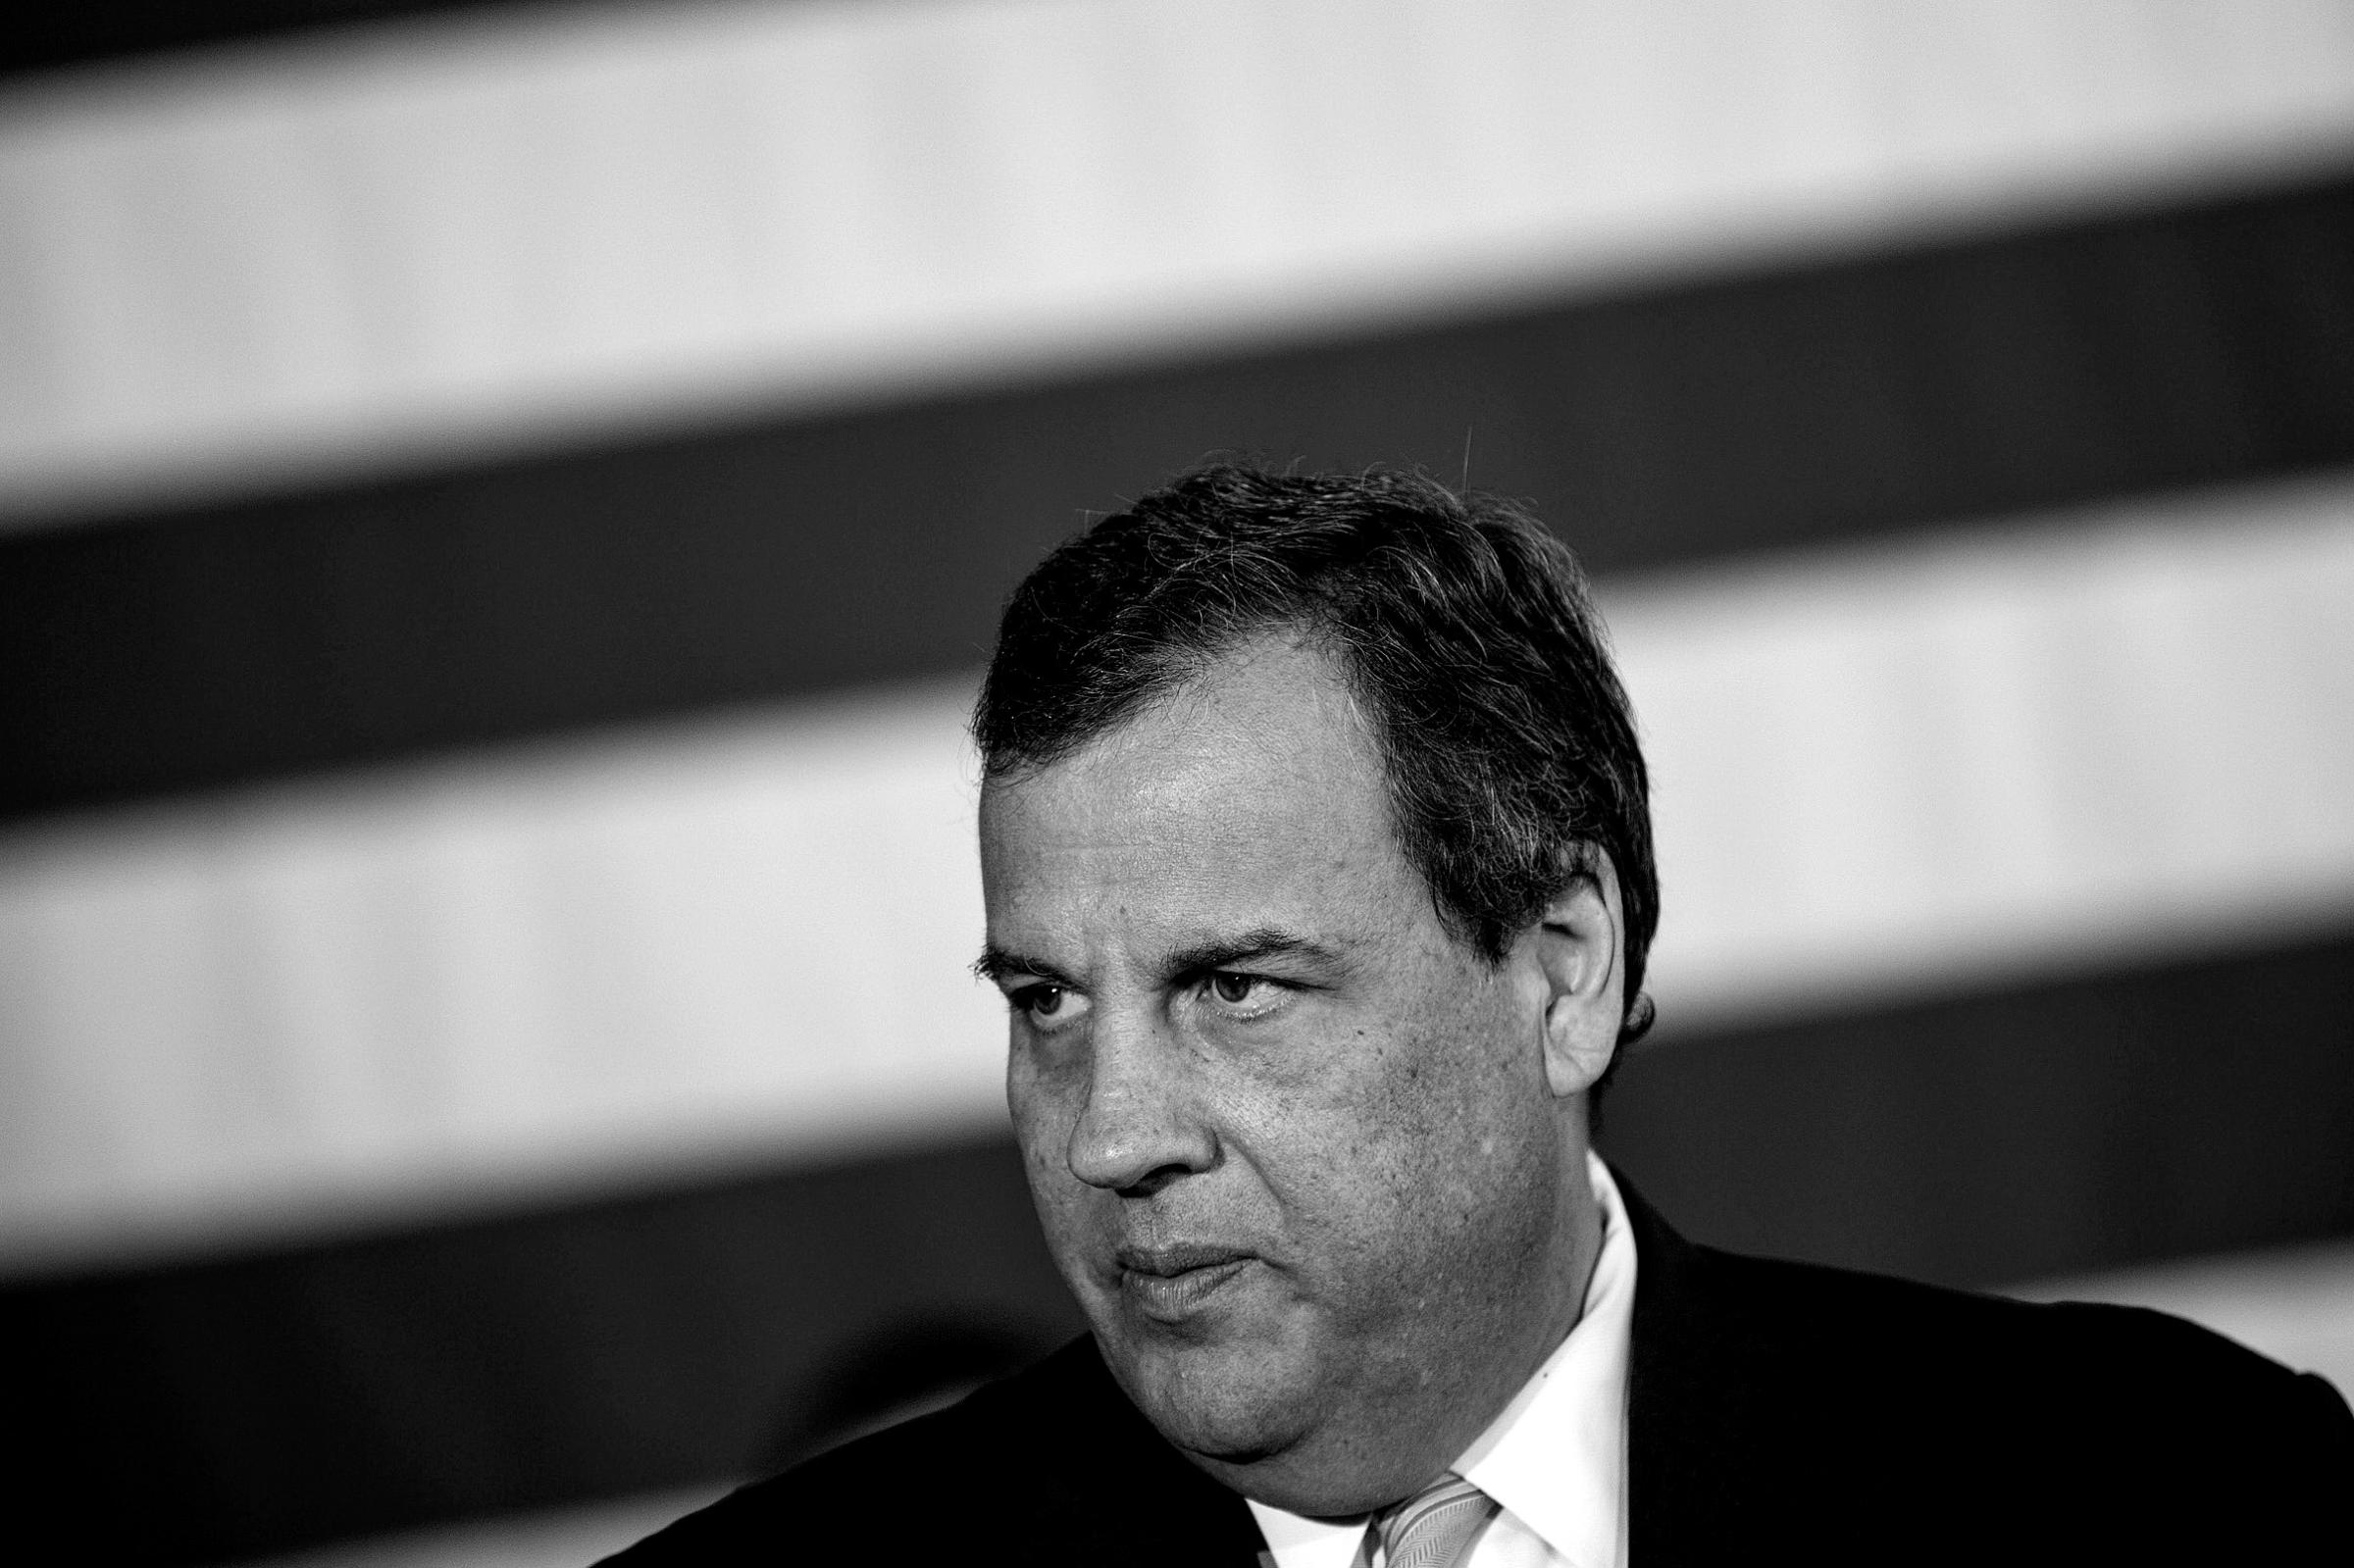 Governor Chris Christie Holds News Conference Urging NJ Congressional Members To Oppose Iran Deal